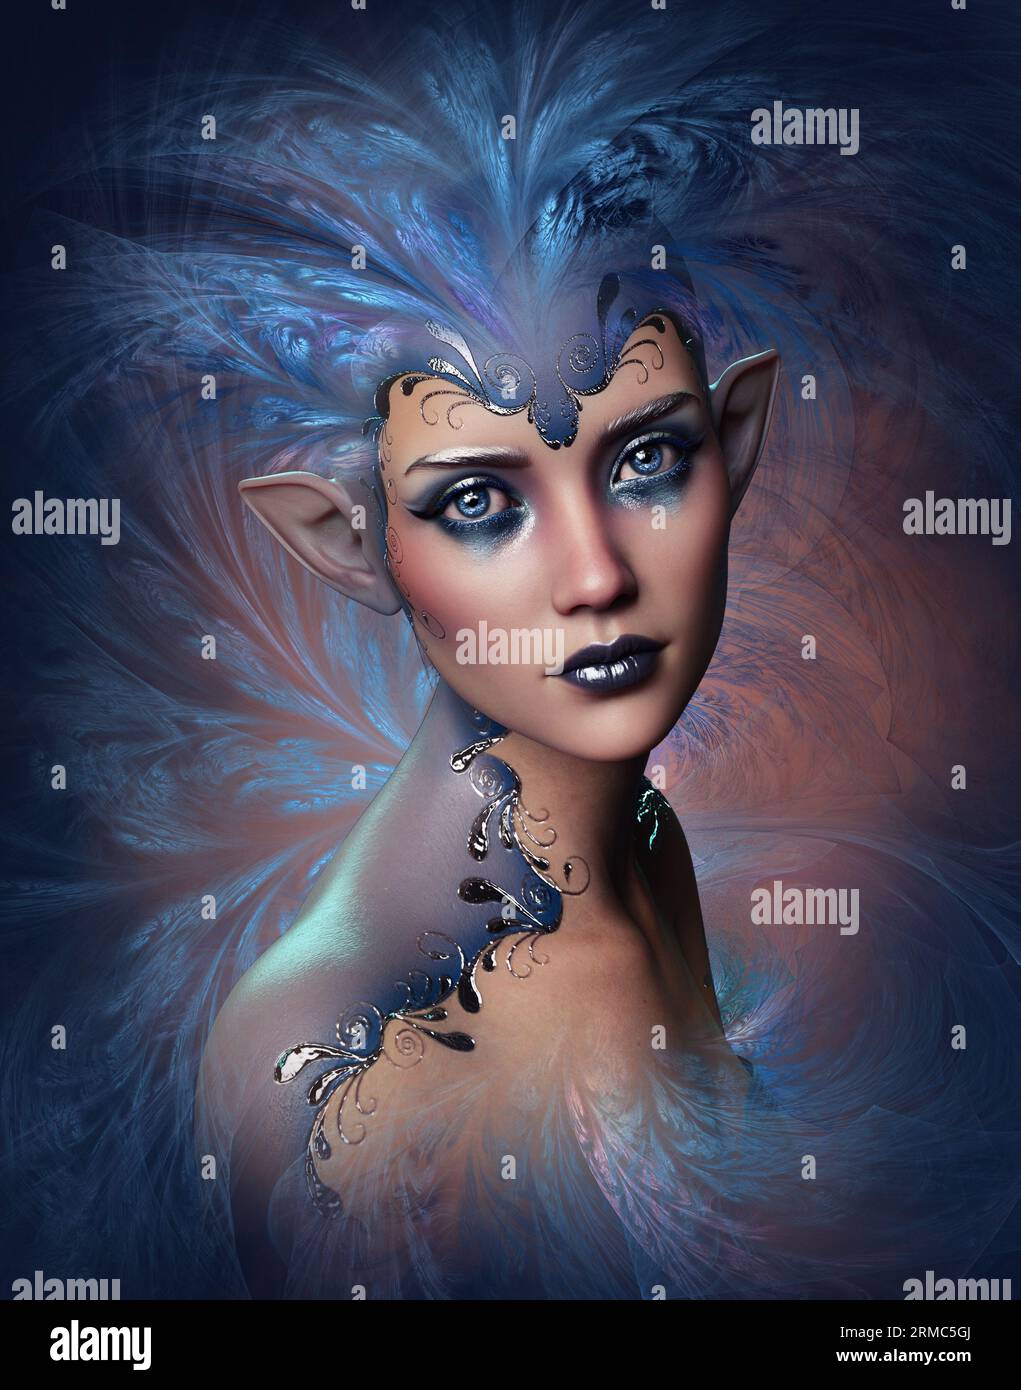 3d computer graphics of a portrait of a fairy with fantasy makeup Stock Photo